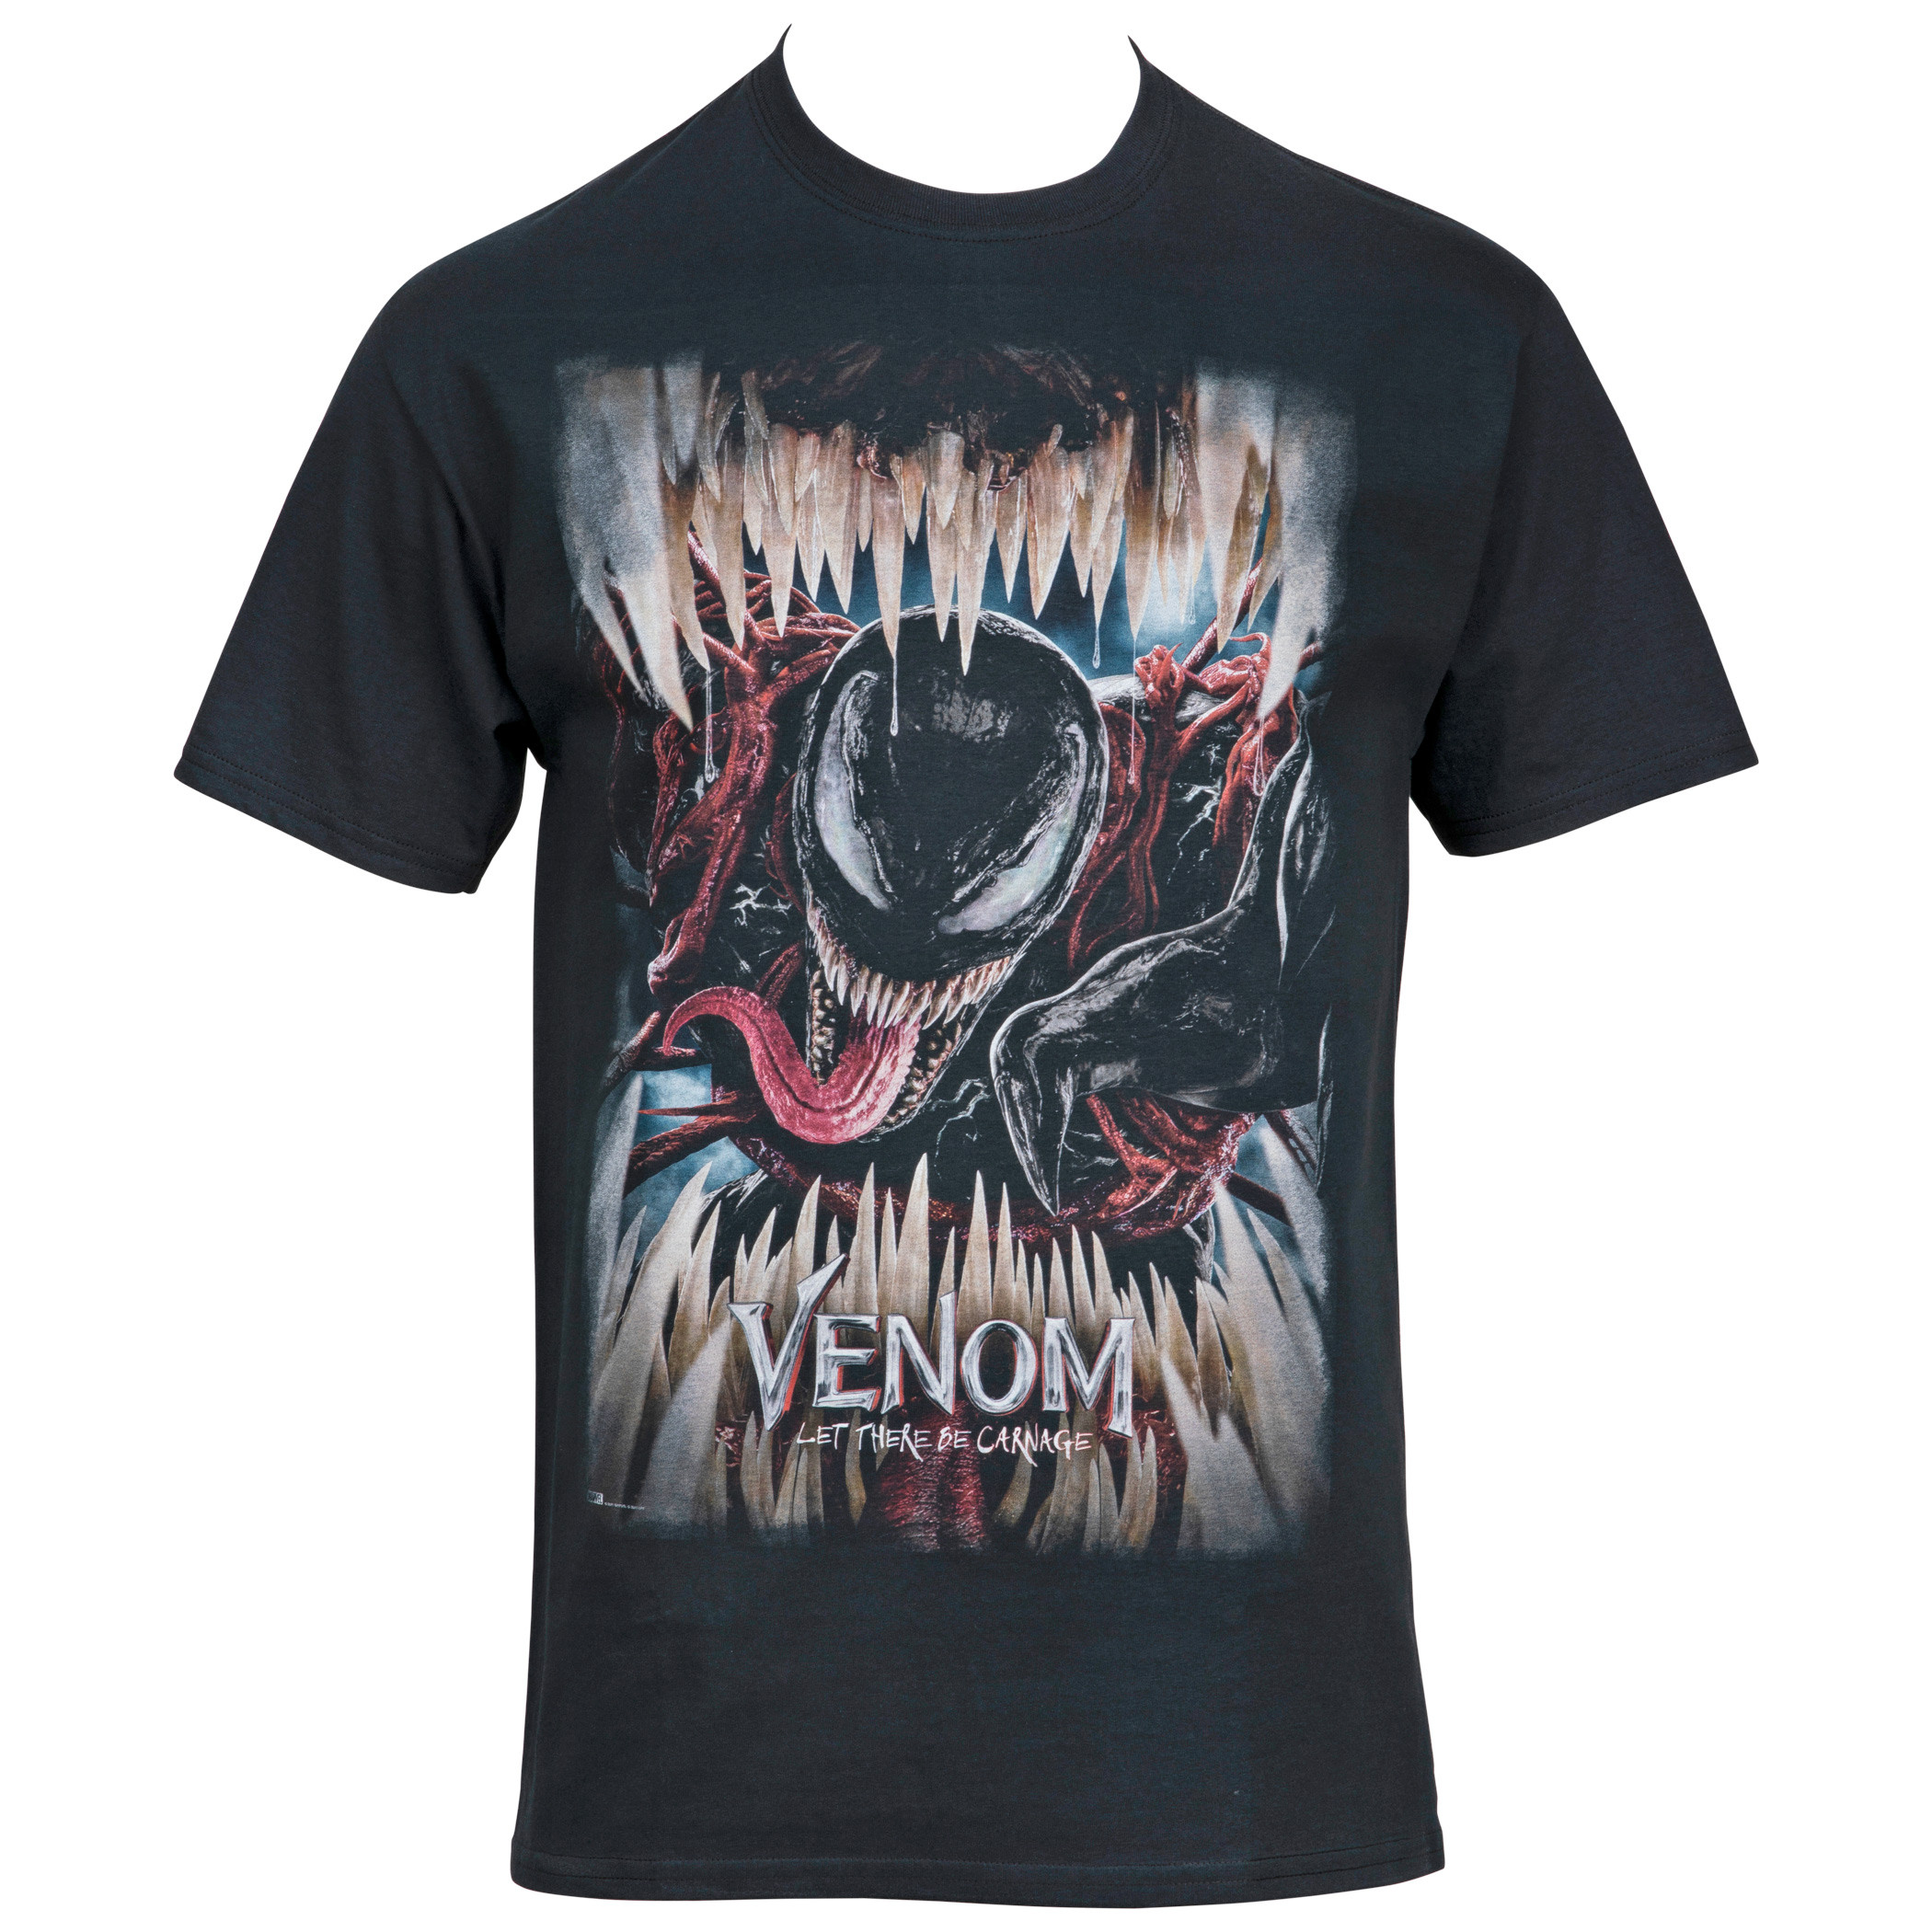 Venom Let There Be Carnage Movie Poster T-Shirt